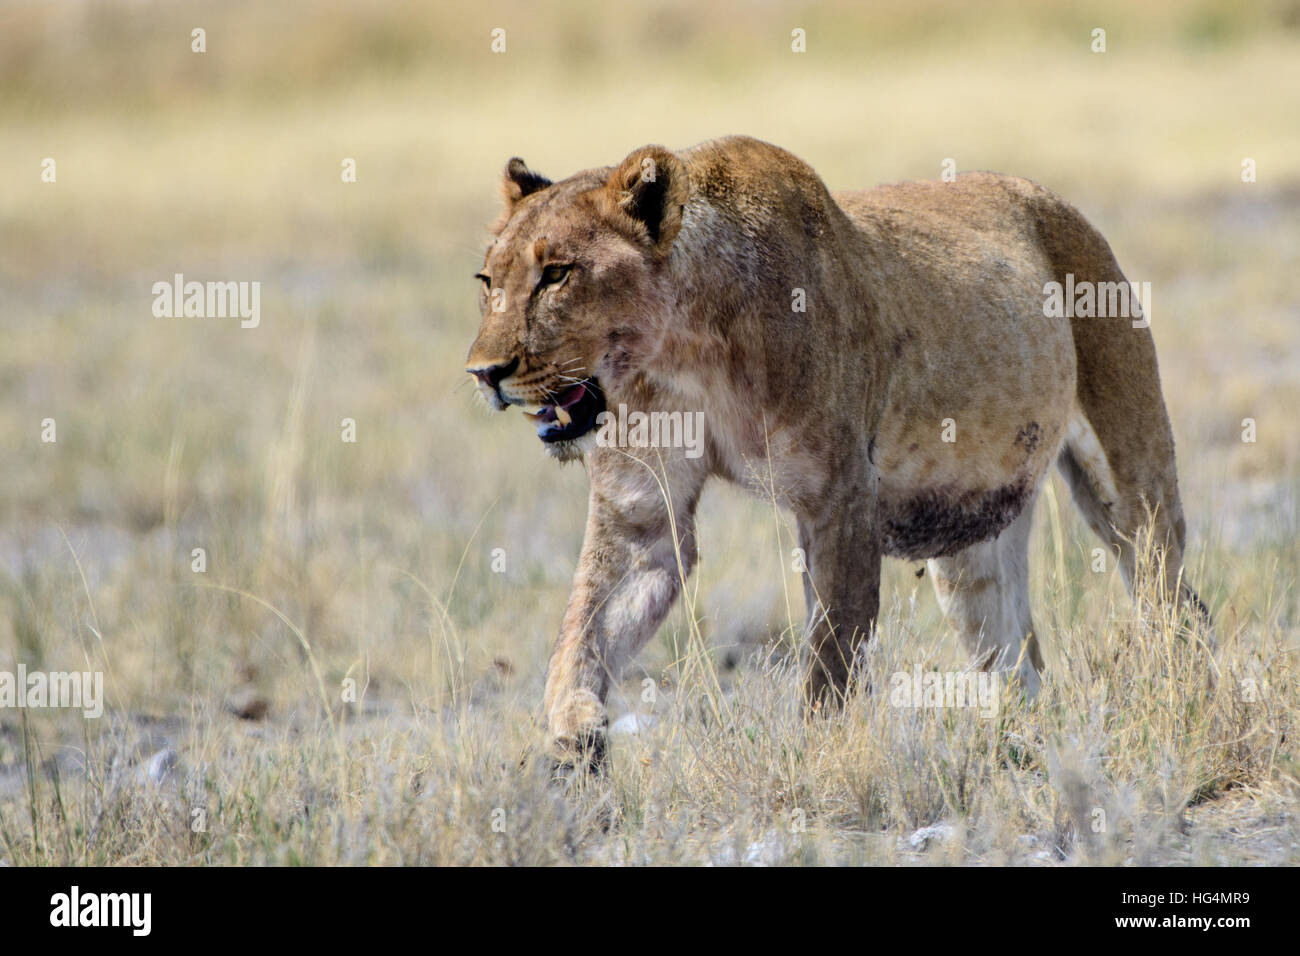 Lioness approaching Stock Photo